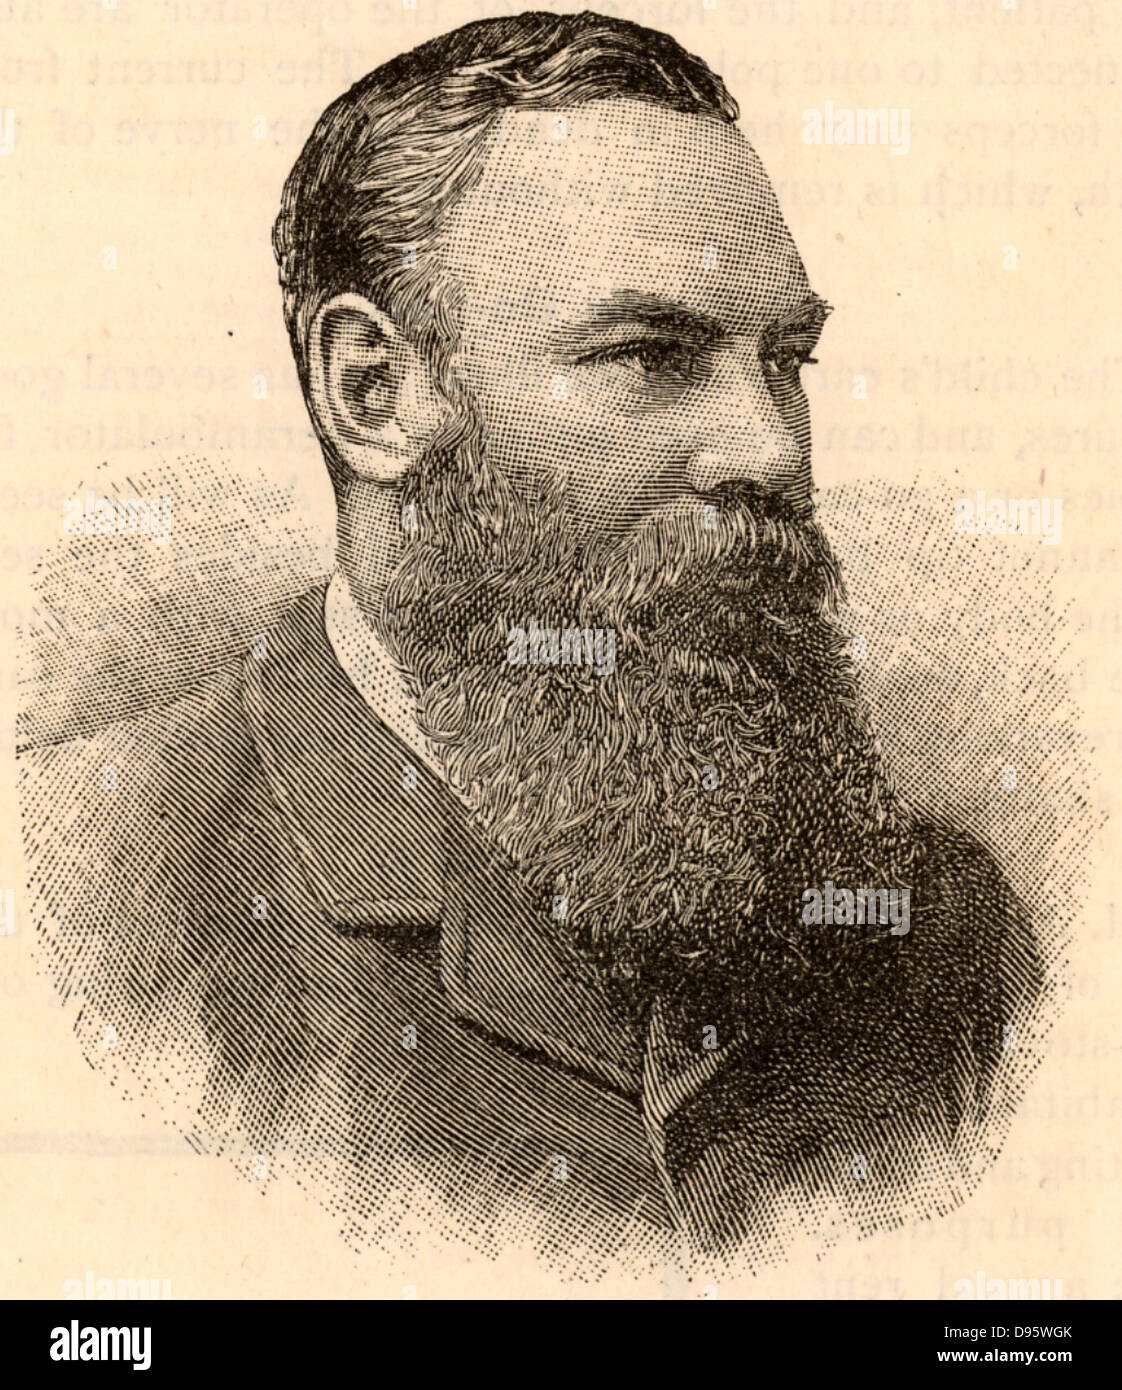 William Gilbert ('W G') Grace (1848-1915) English first-class cricketer and physician, born at Downend near Bristol. His career lasted from 1864-1908.  Engraving from 'Cassell's Family Magazine' (London, 1891). Stock Photo